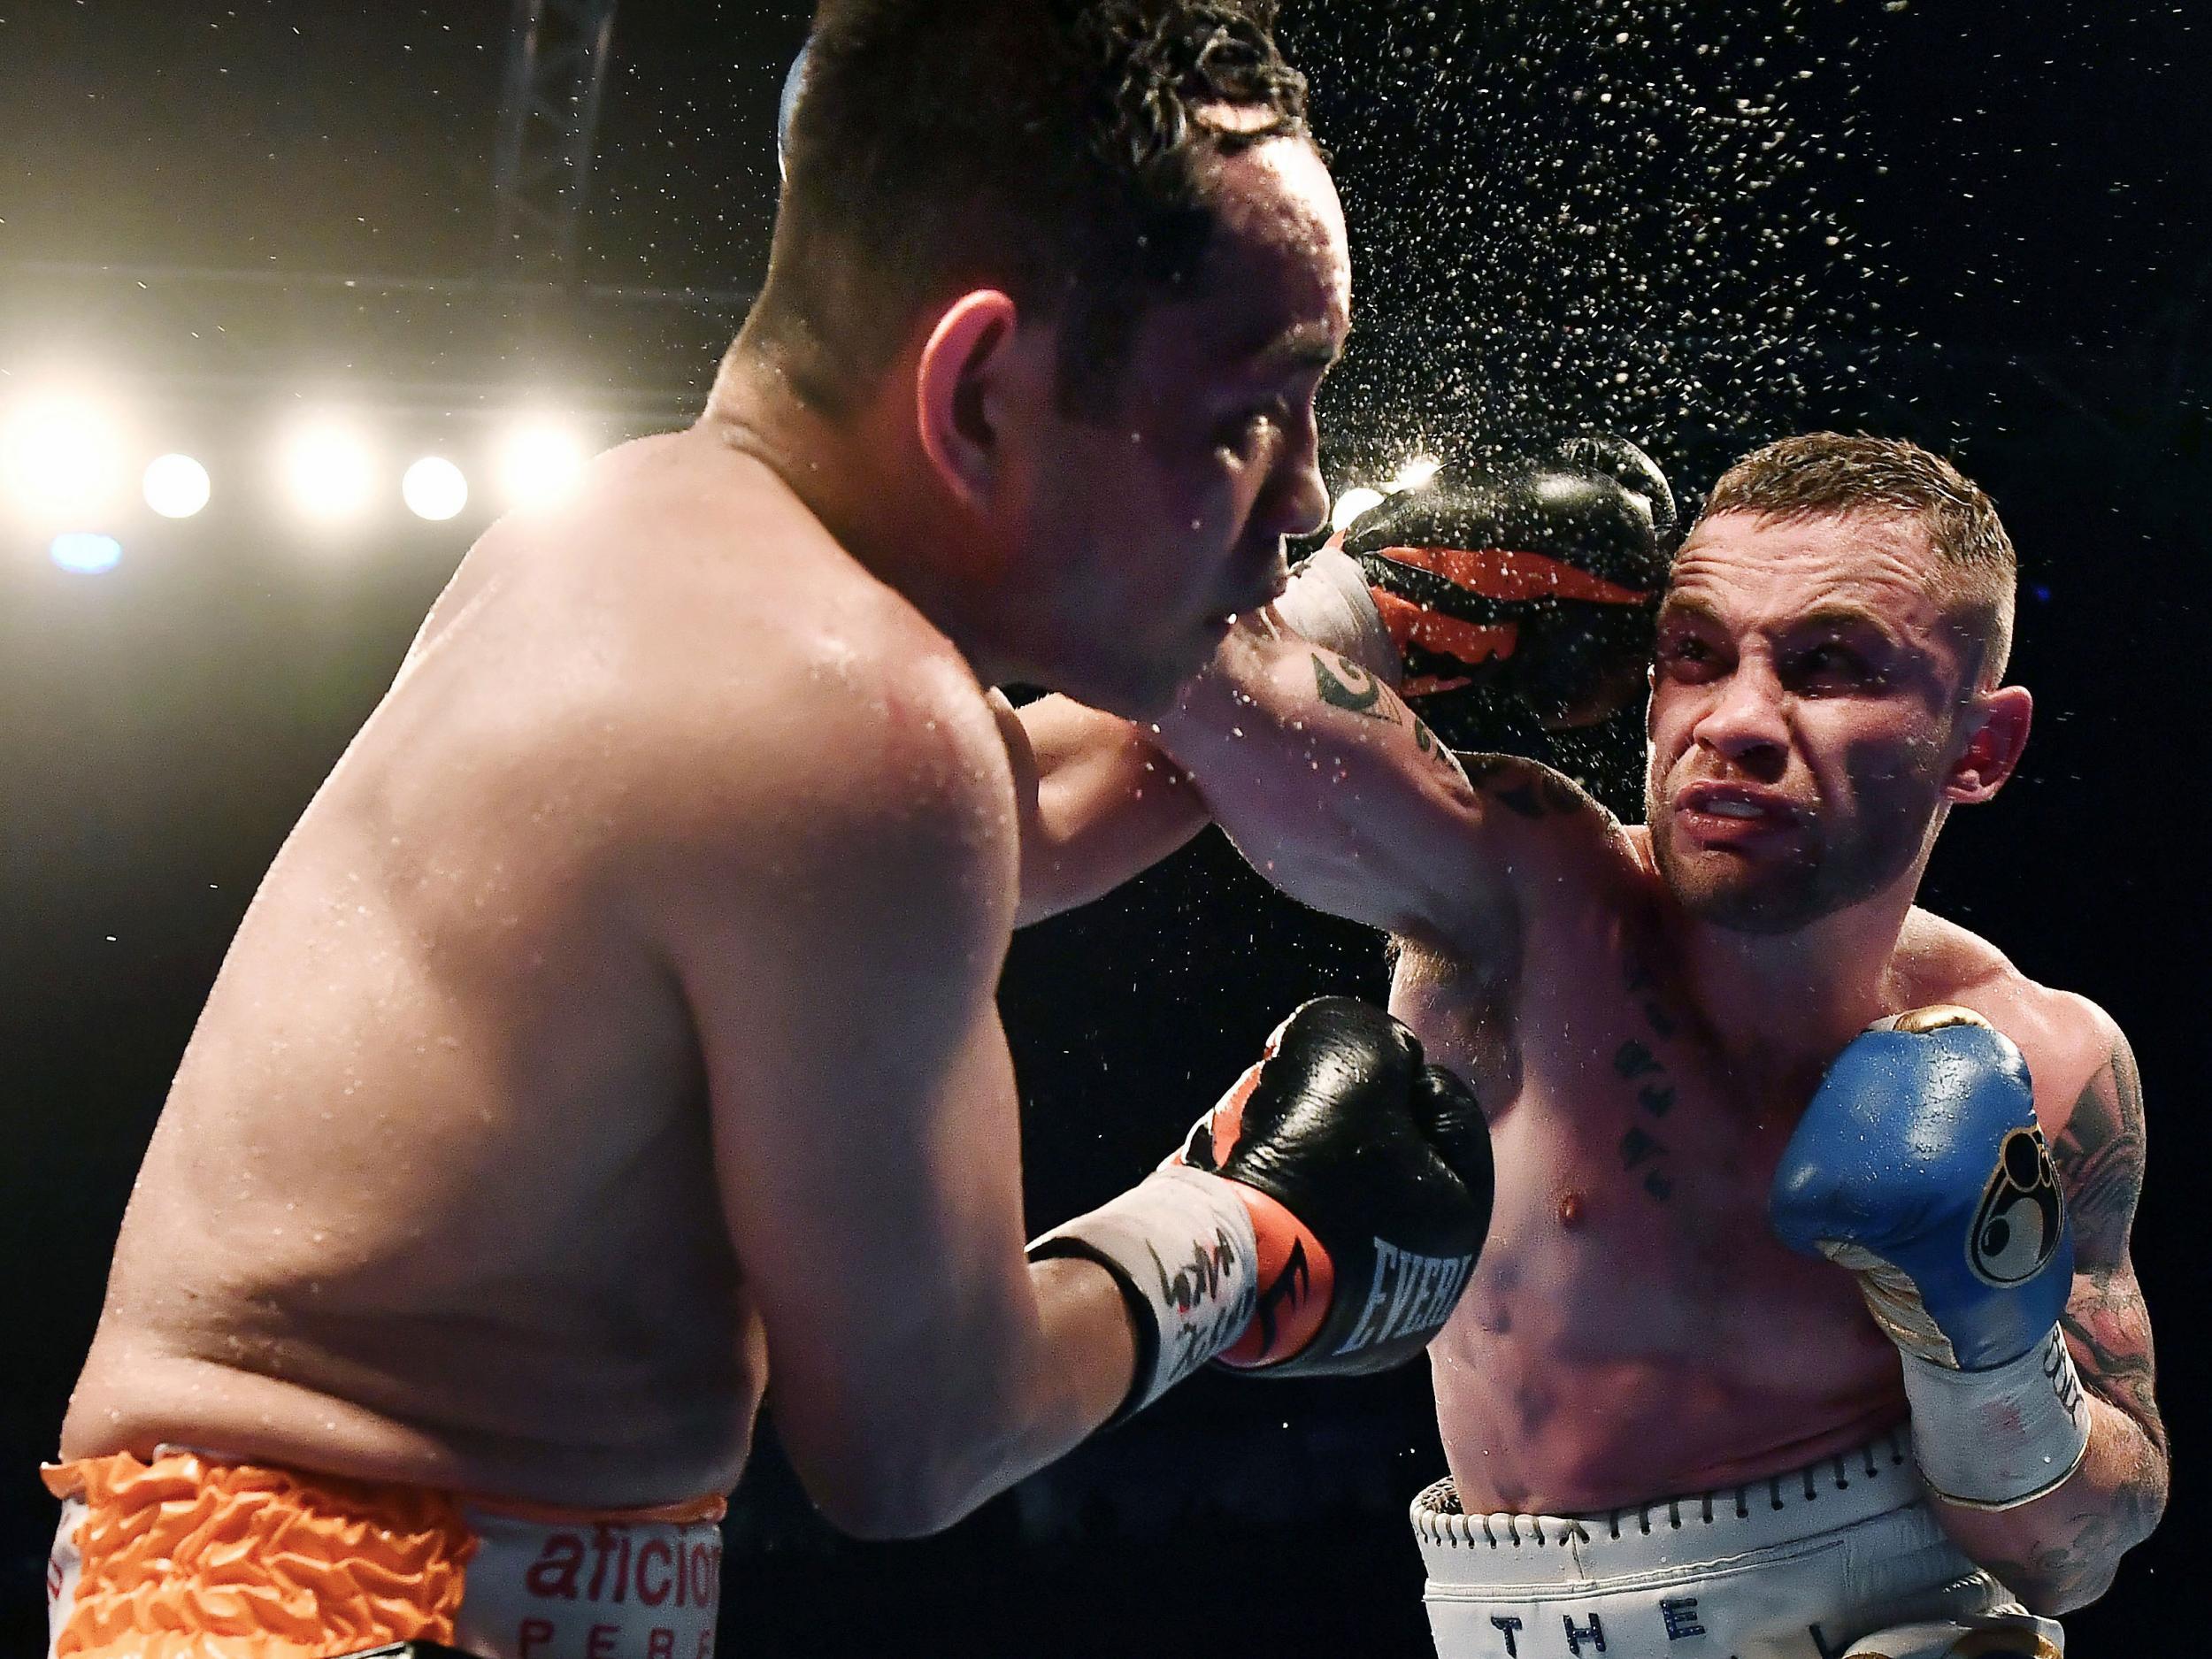 Frampton put on a show in front of his home crowd